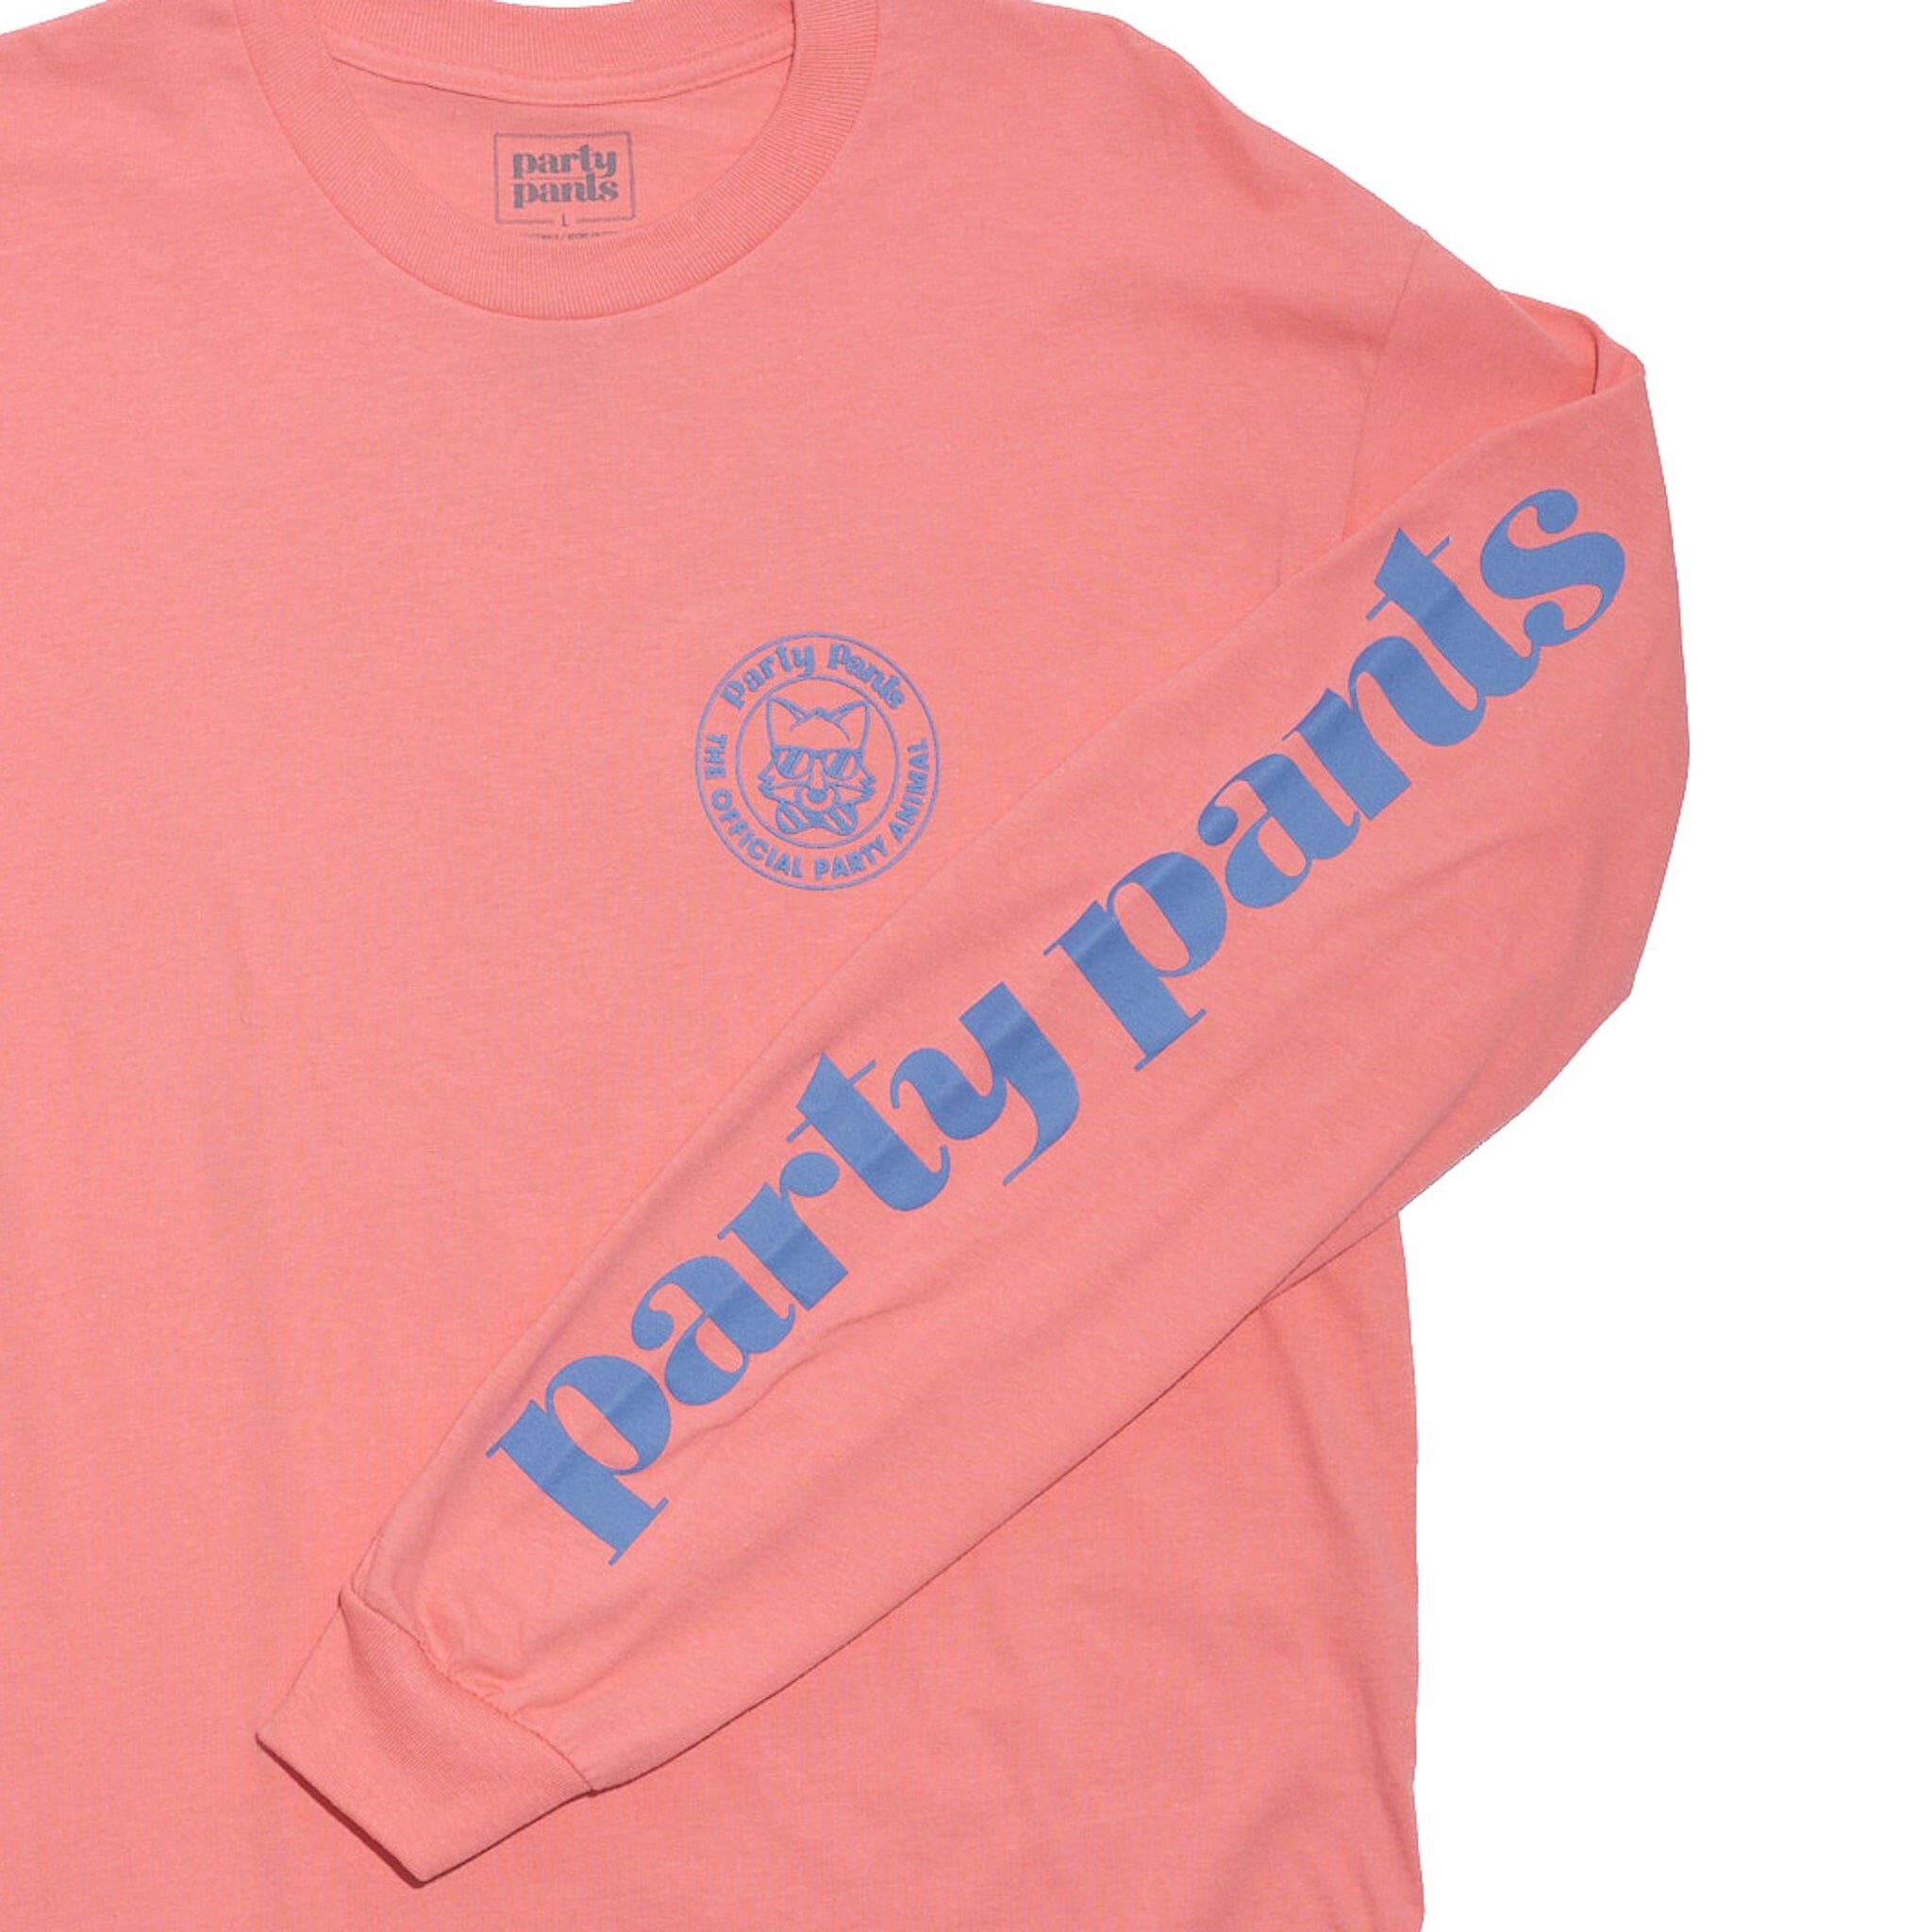 PARTY ANIMAL LONG SLEEVE TEE - CORAL SILK LS TEE PARTY PANTS 